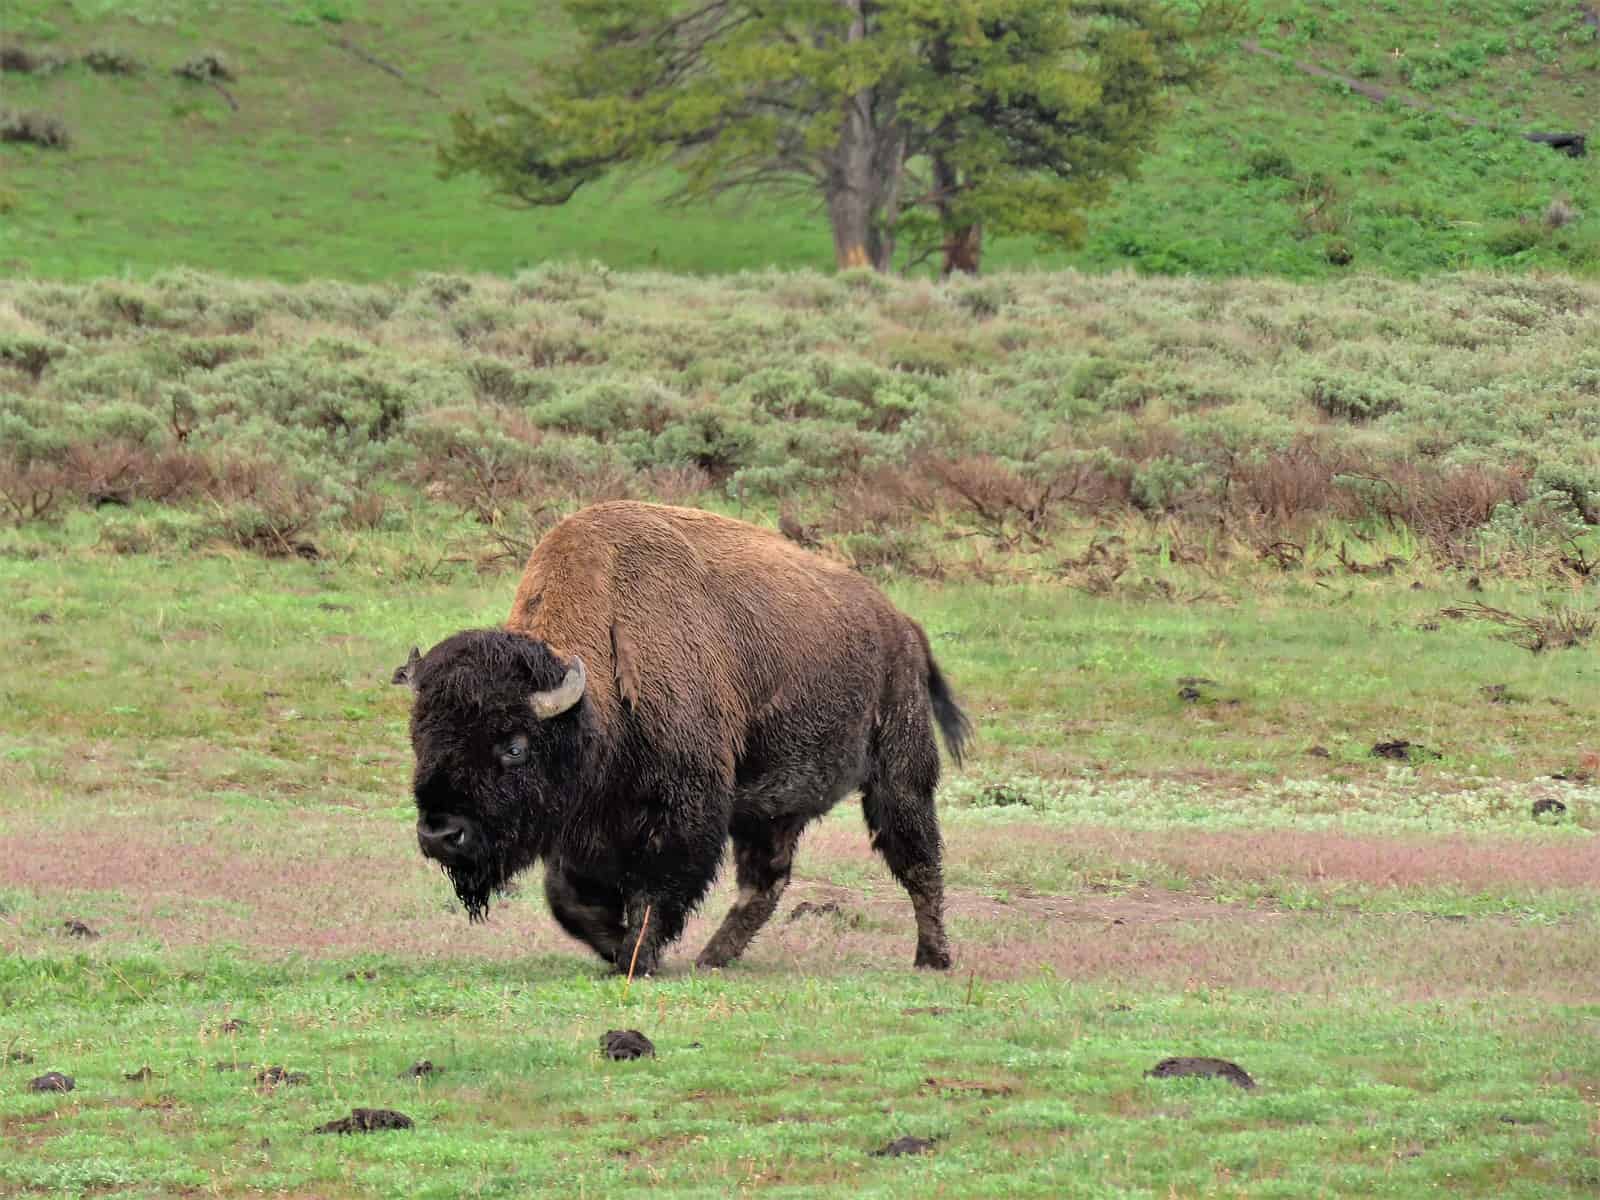 Bison Wallowing